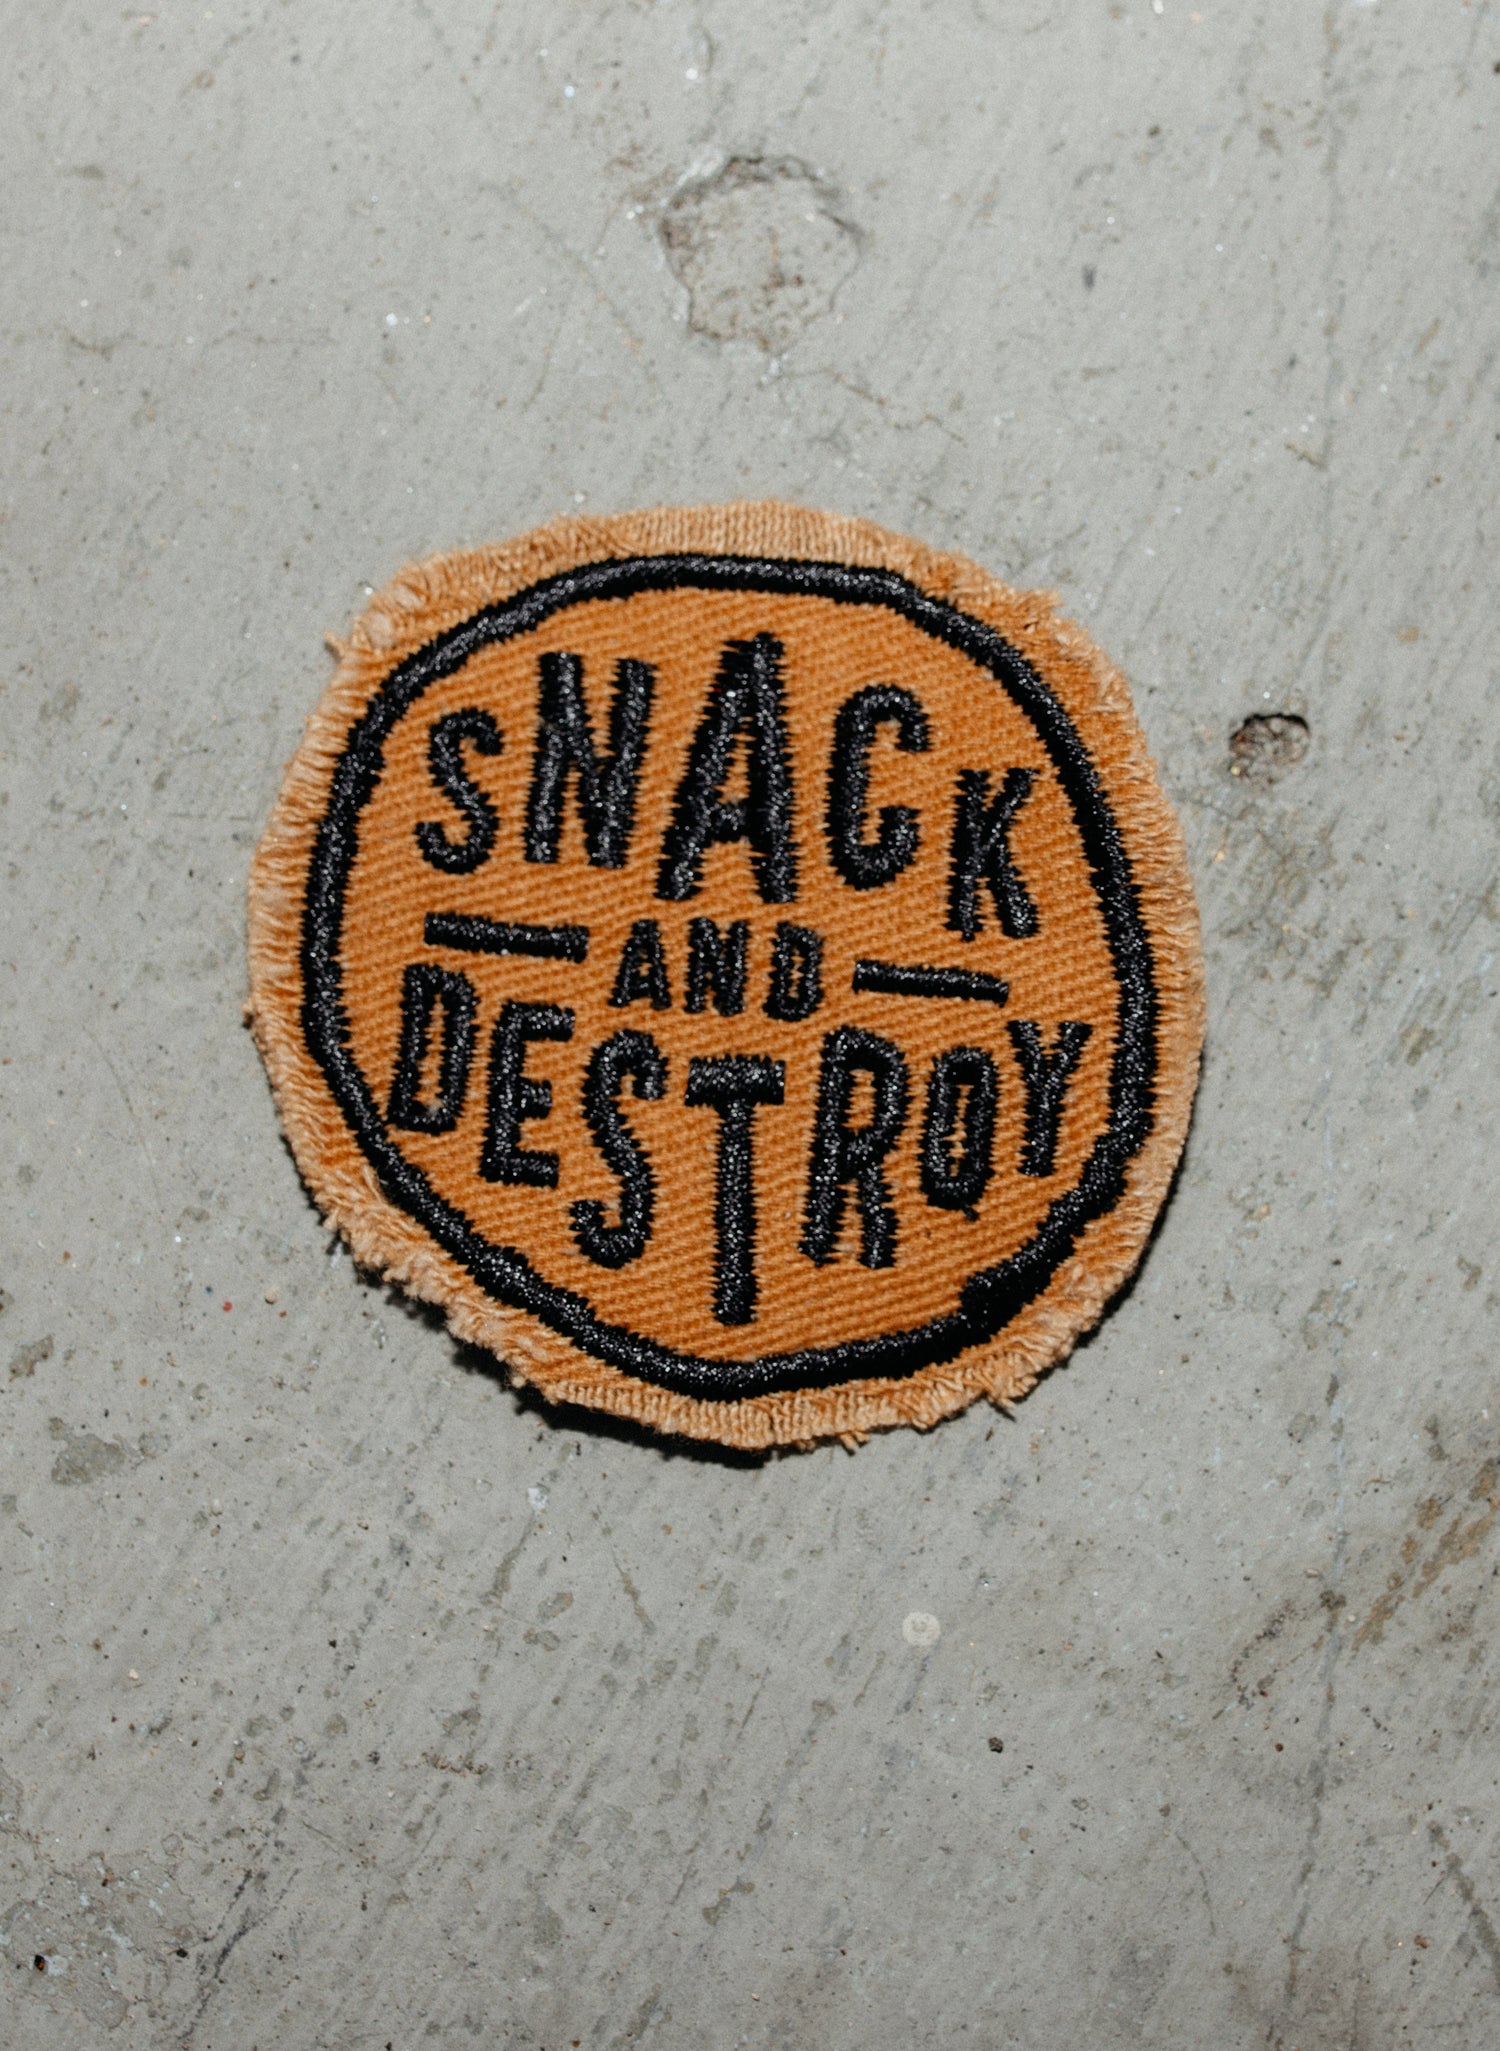 Snack and Destroy Patch